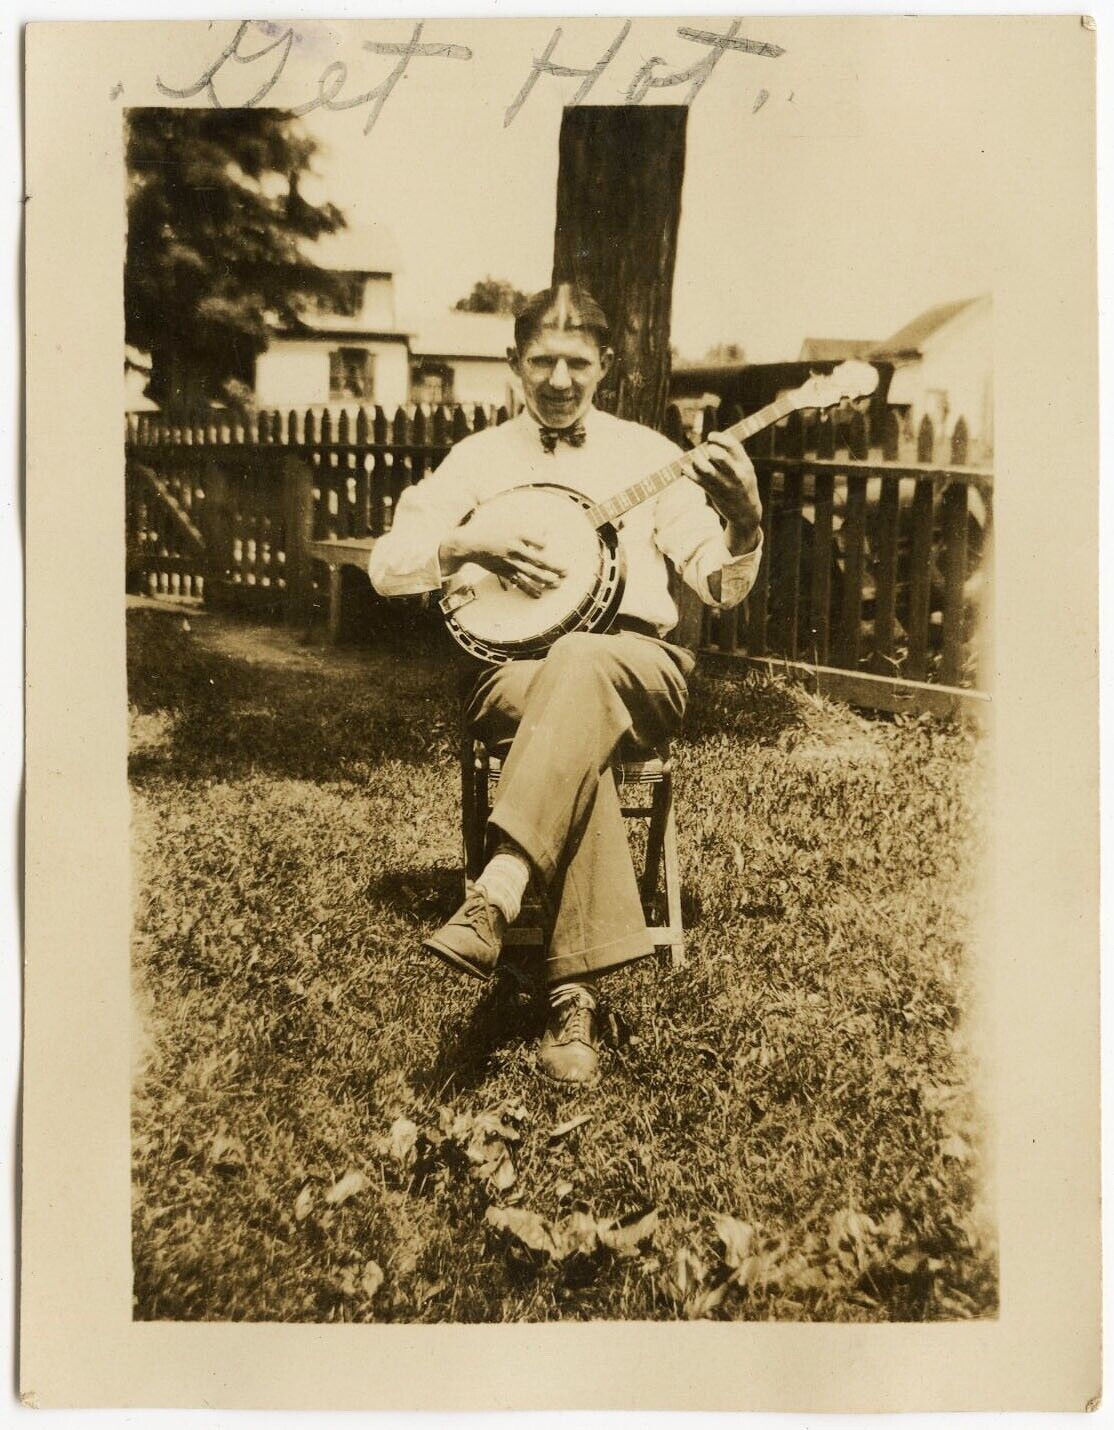 YOUNG GUY PLAYING BANJO 'GET HOT' BOW TIE FASHION VINTAGE SNAPSHOT PHOTO